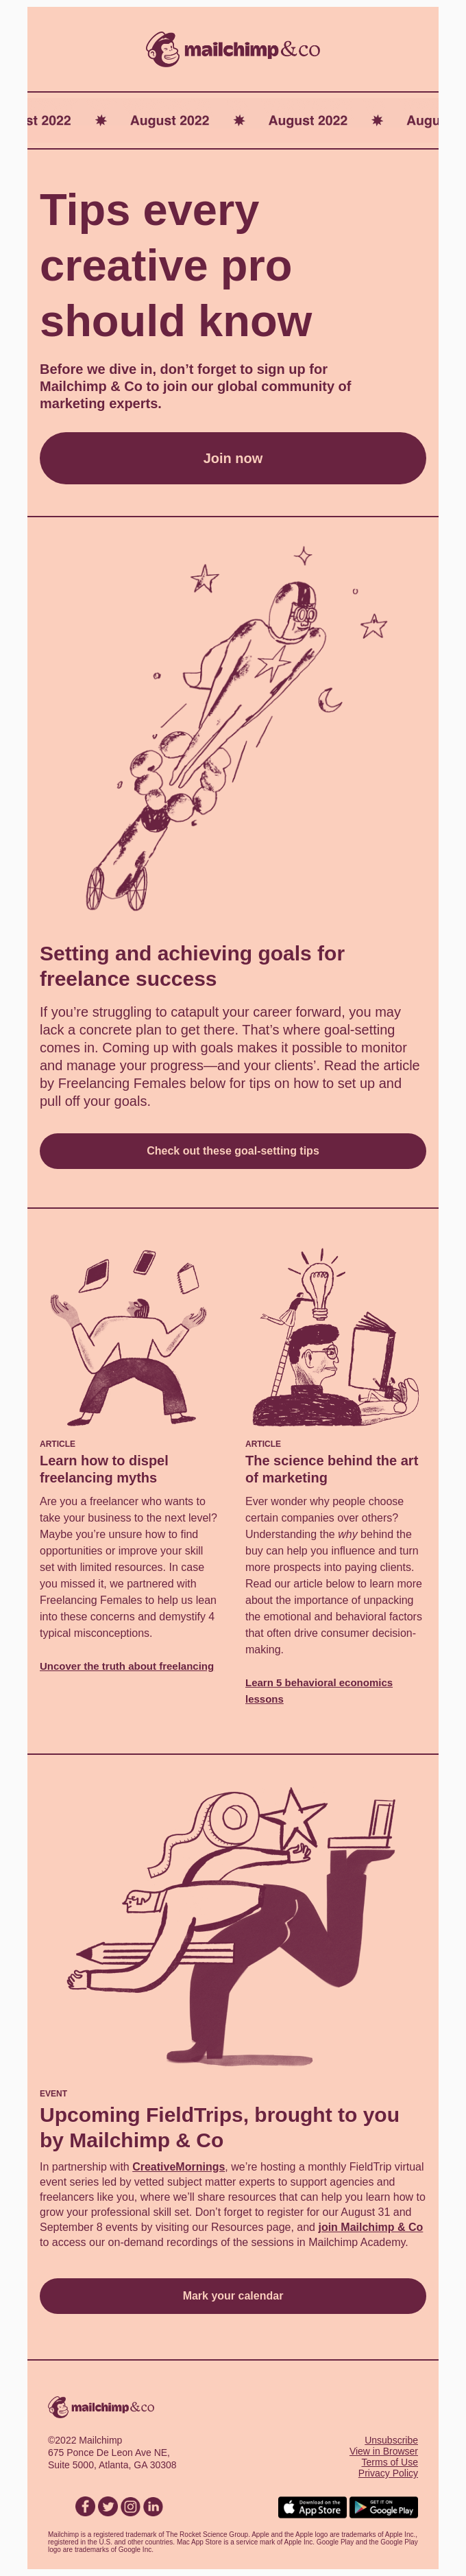 It’s here: Mailchimp & Co Newsletter